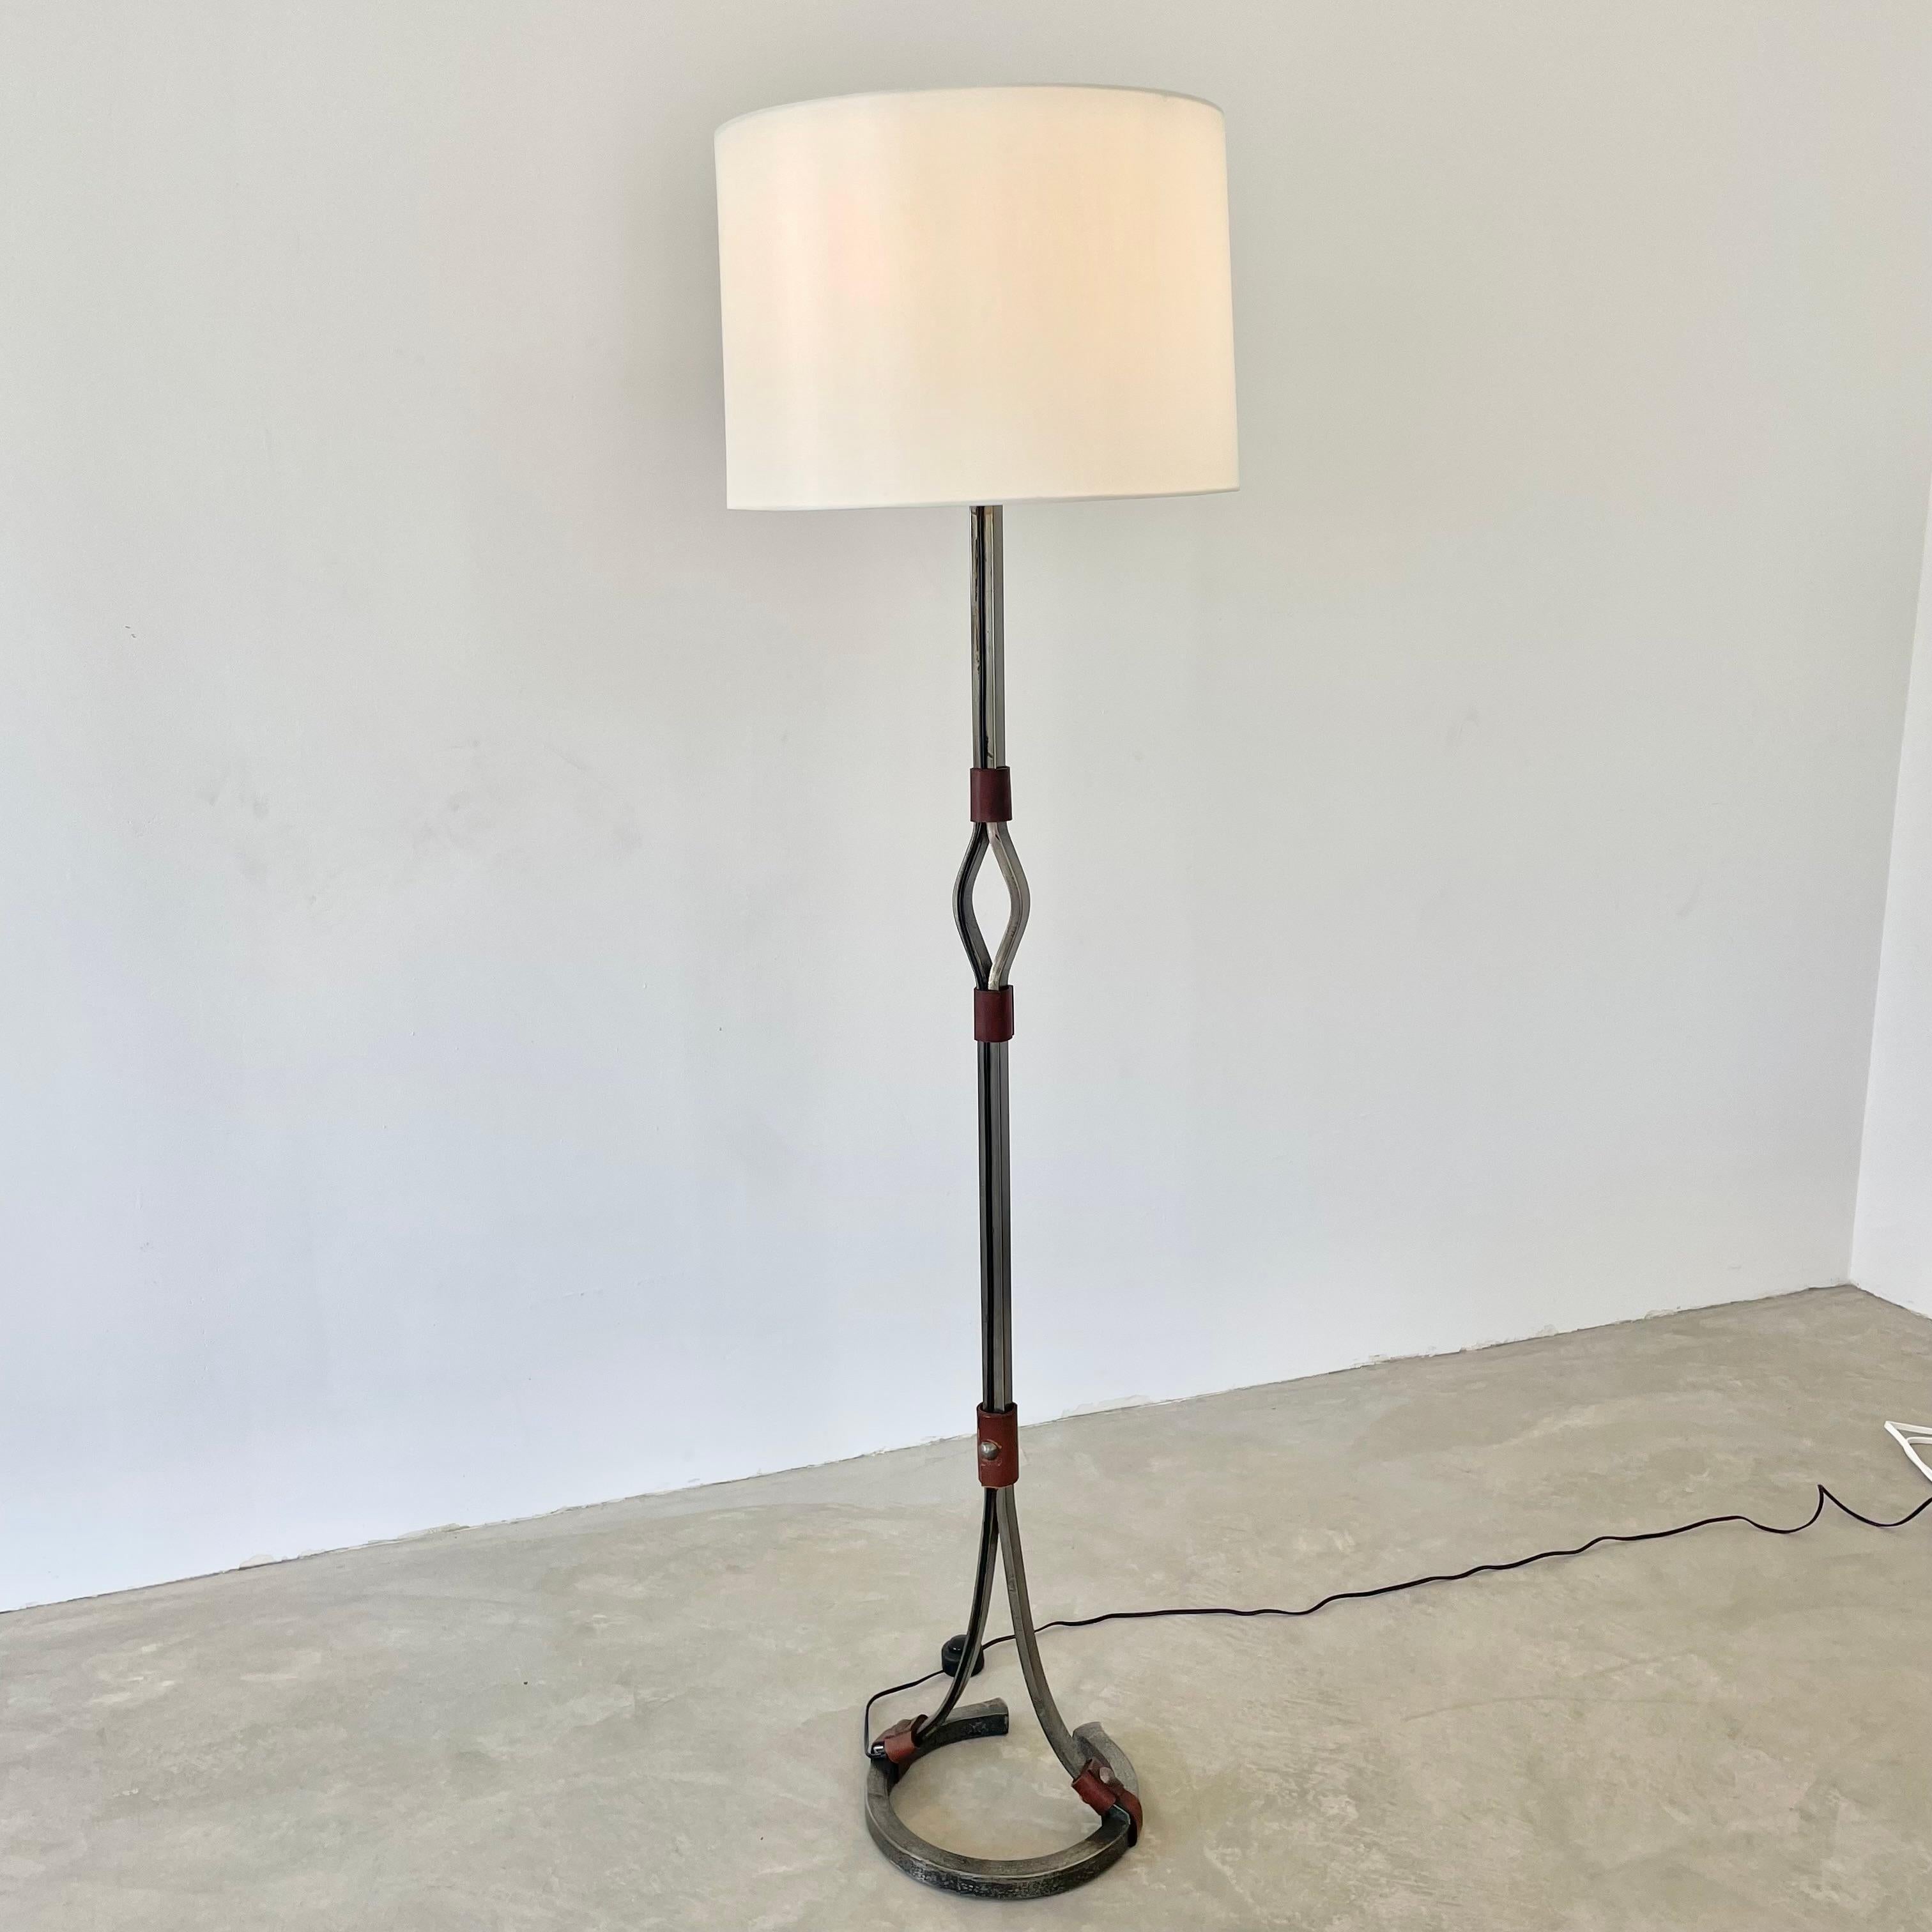 Jacques Adnet Steel and Leather Floor Lamp, 1950s France For Sale 1